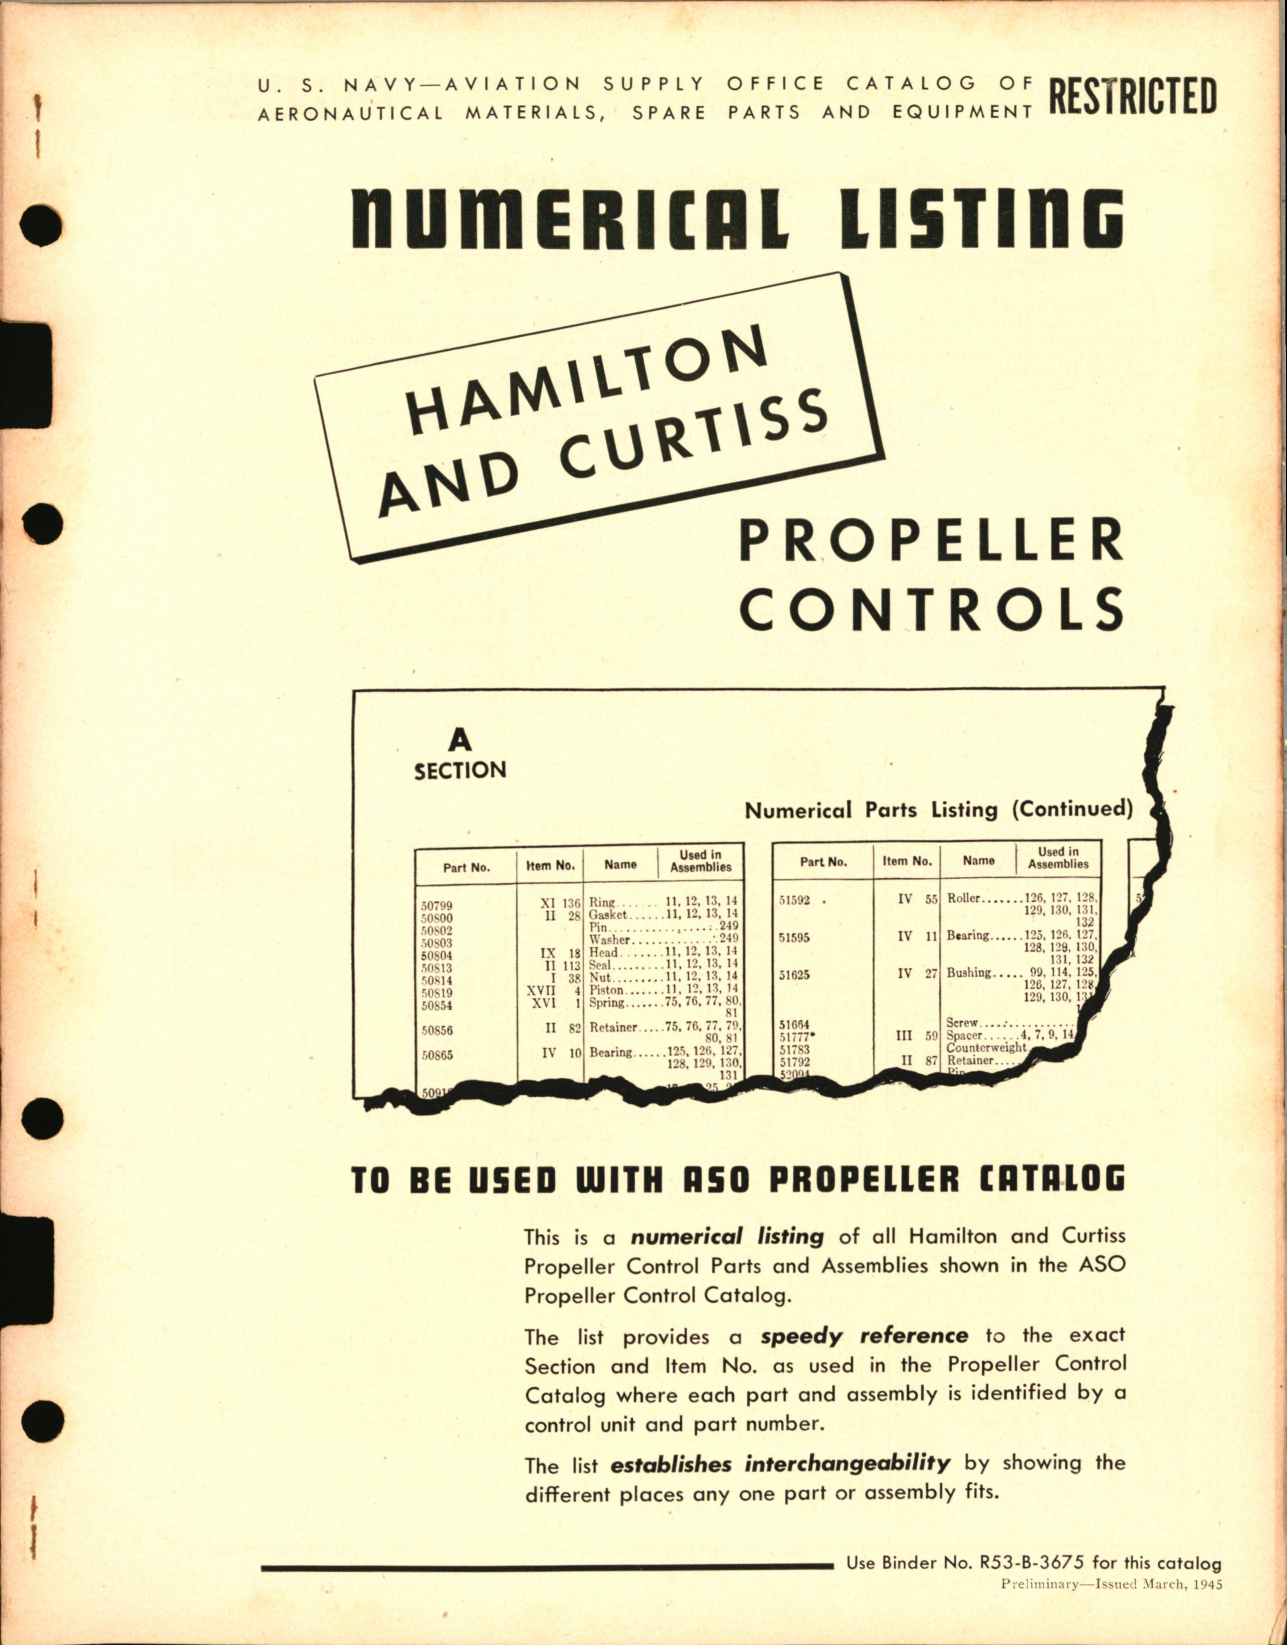 Sample page 1 from AirCorps Library document: Hamilton and Curtiss Propeller Controls Numerical Listings